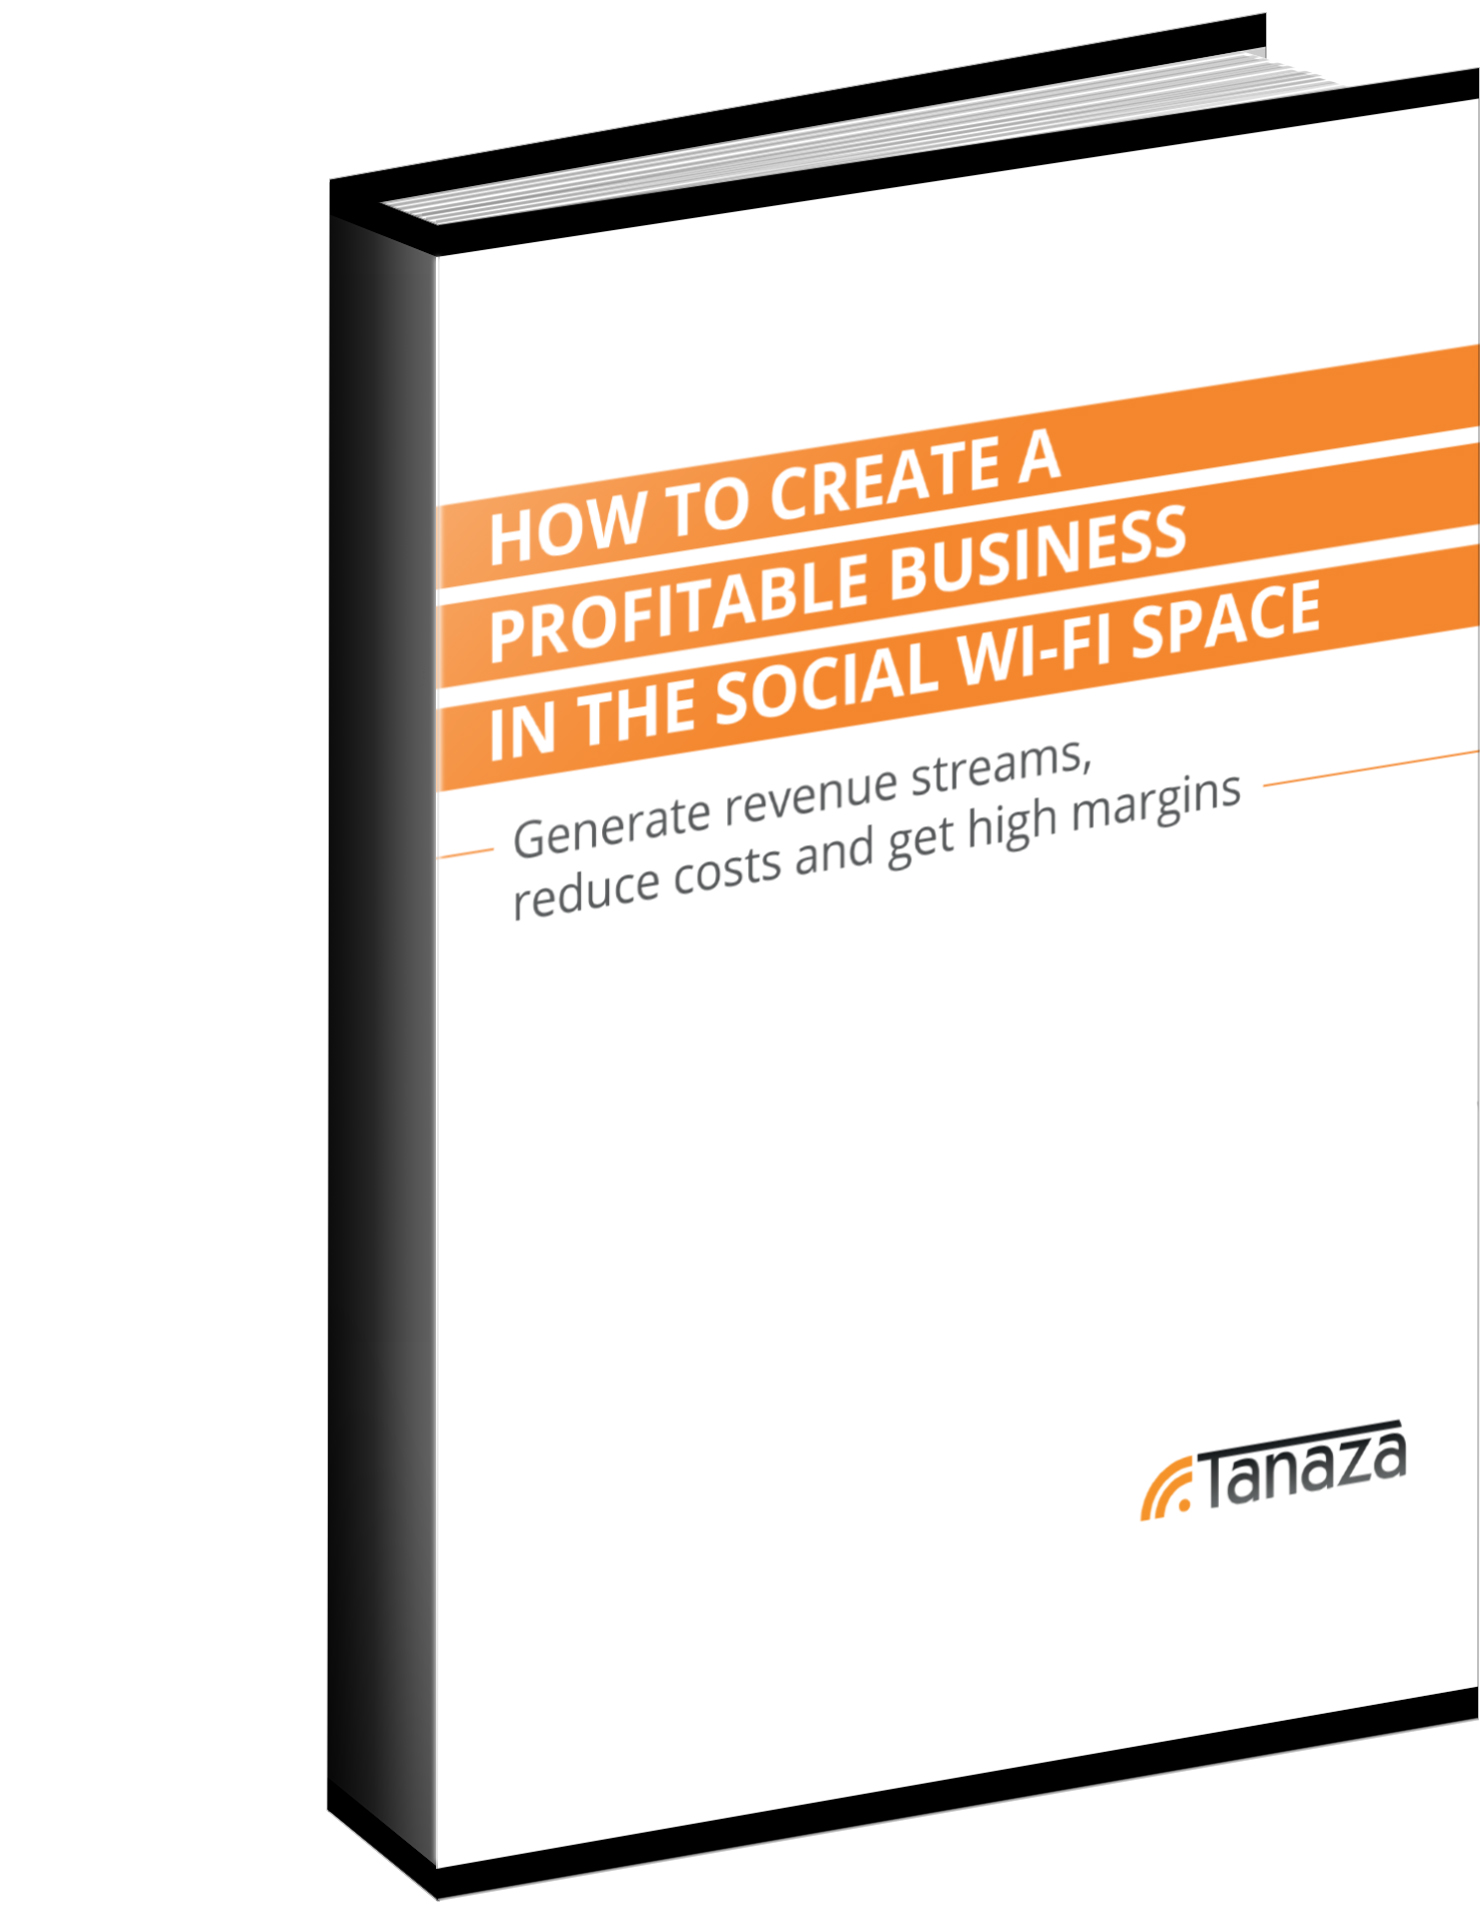 how to create a profitable business in the social wi-fi space